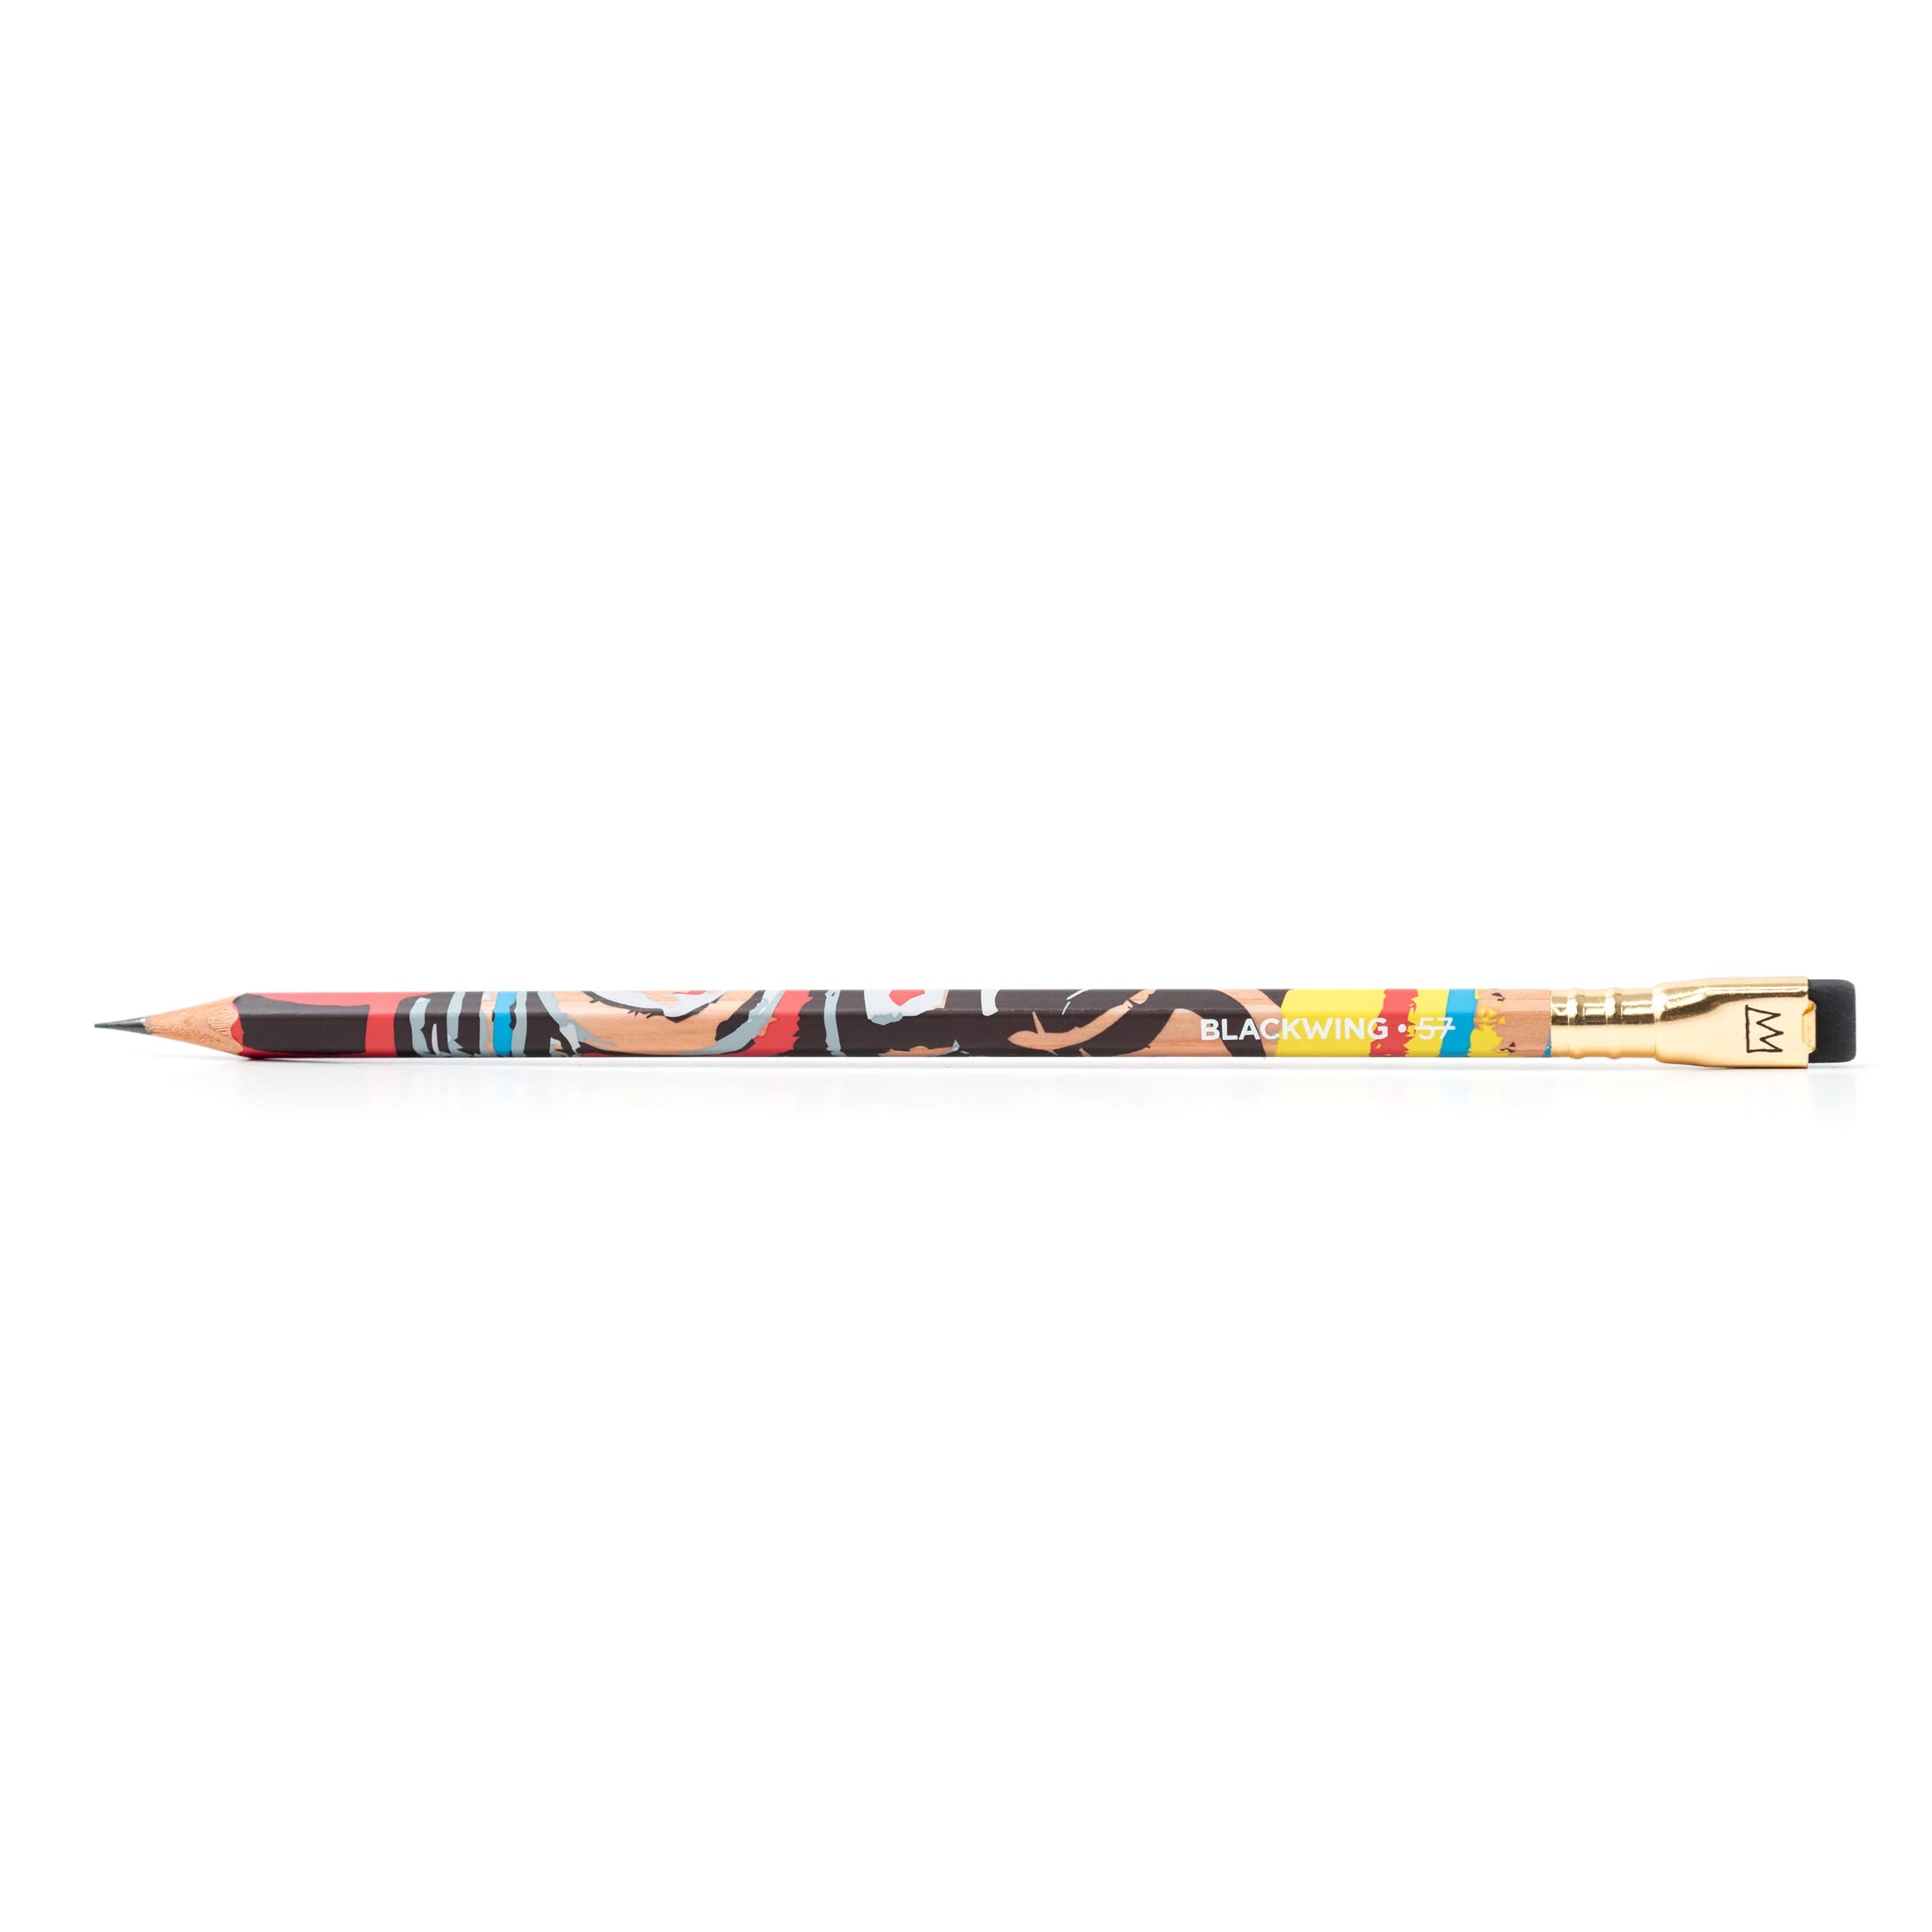 Blackwing Volume 57 Limited Edition Pencil